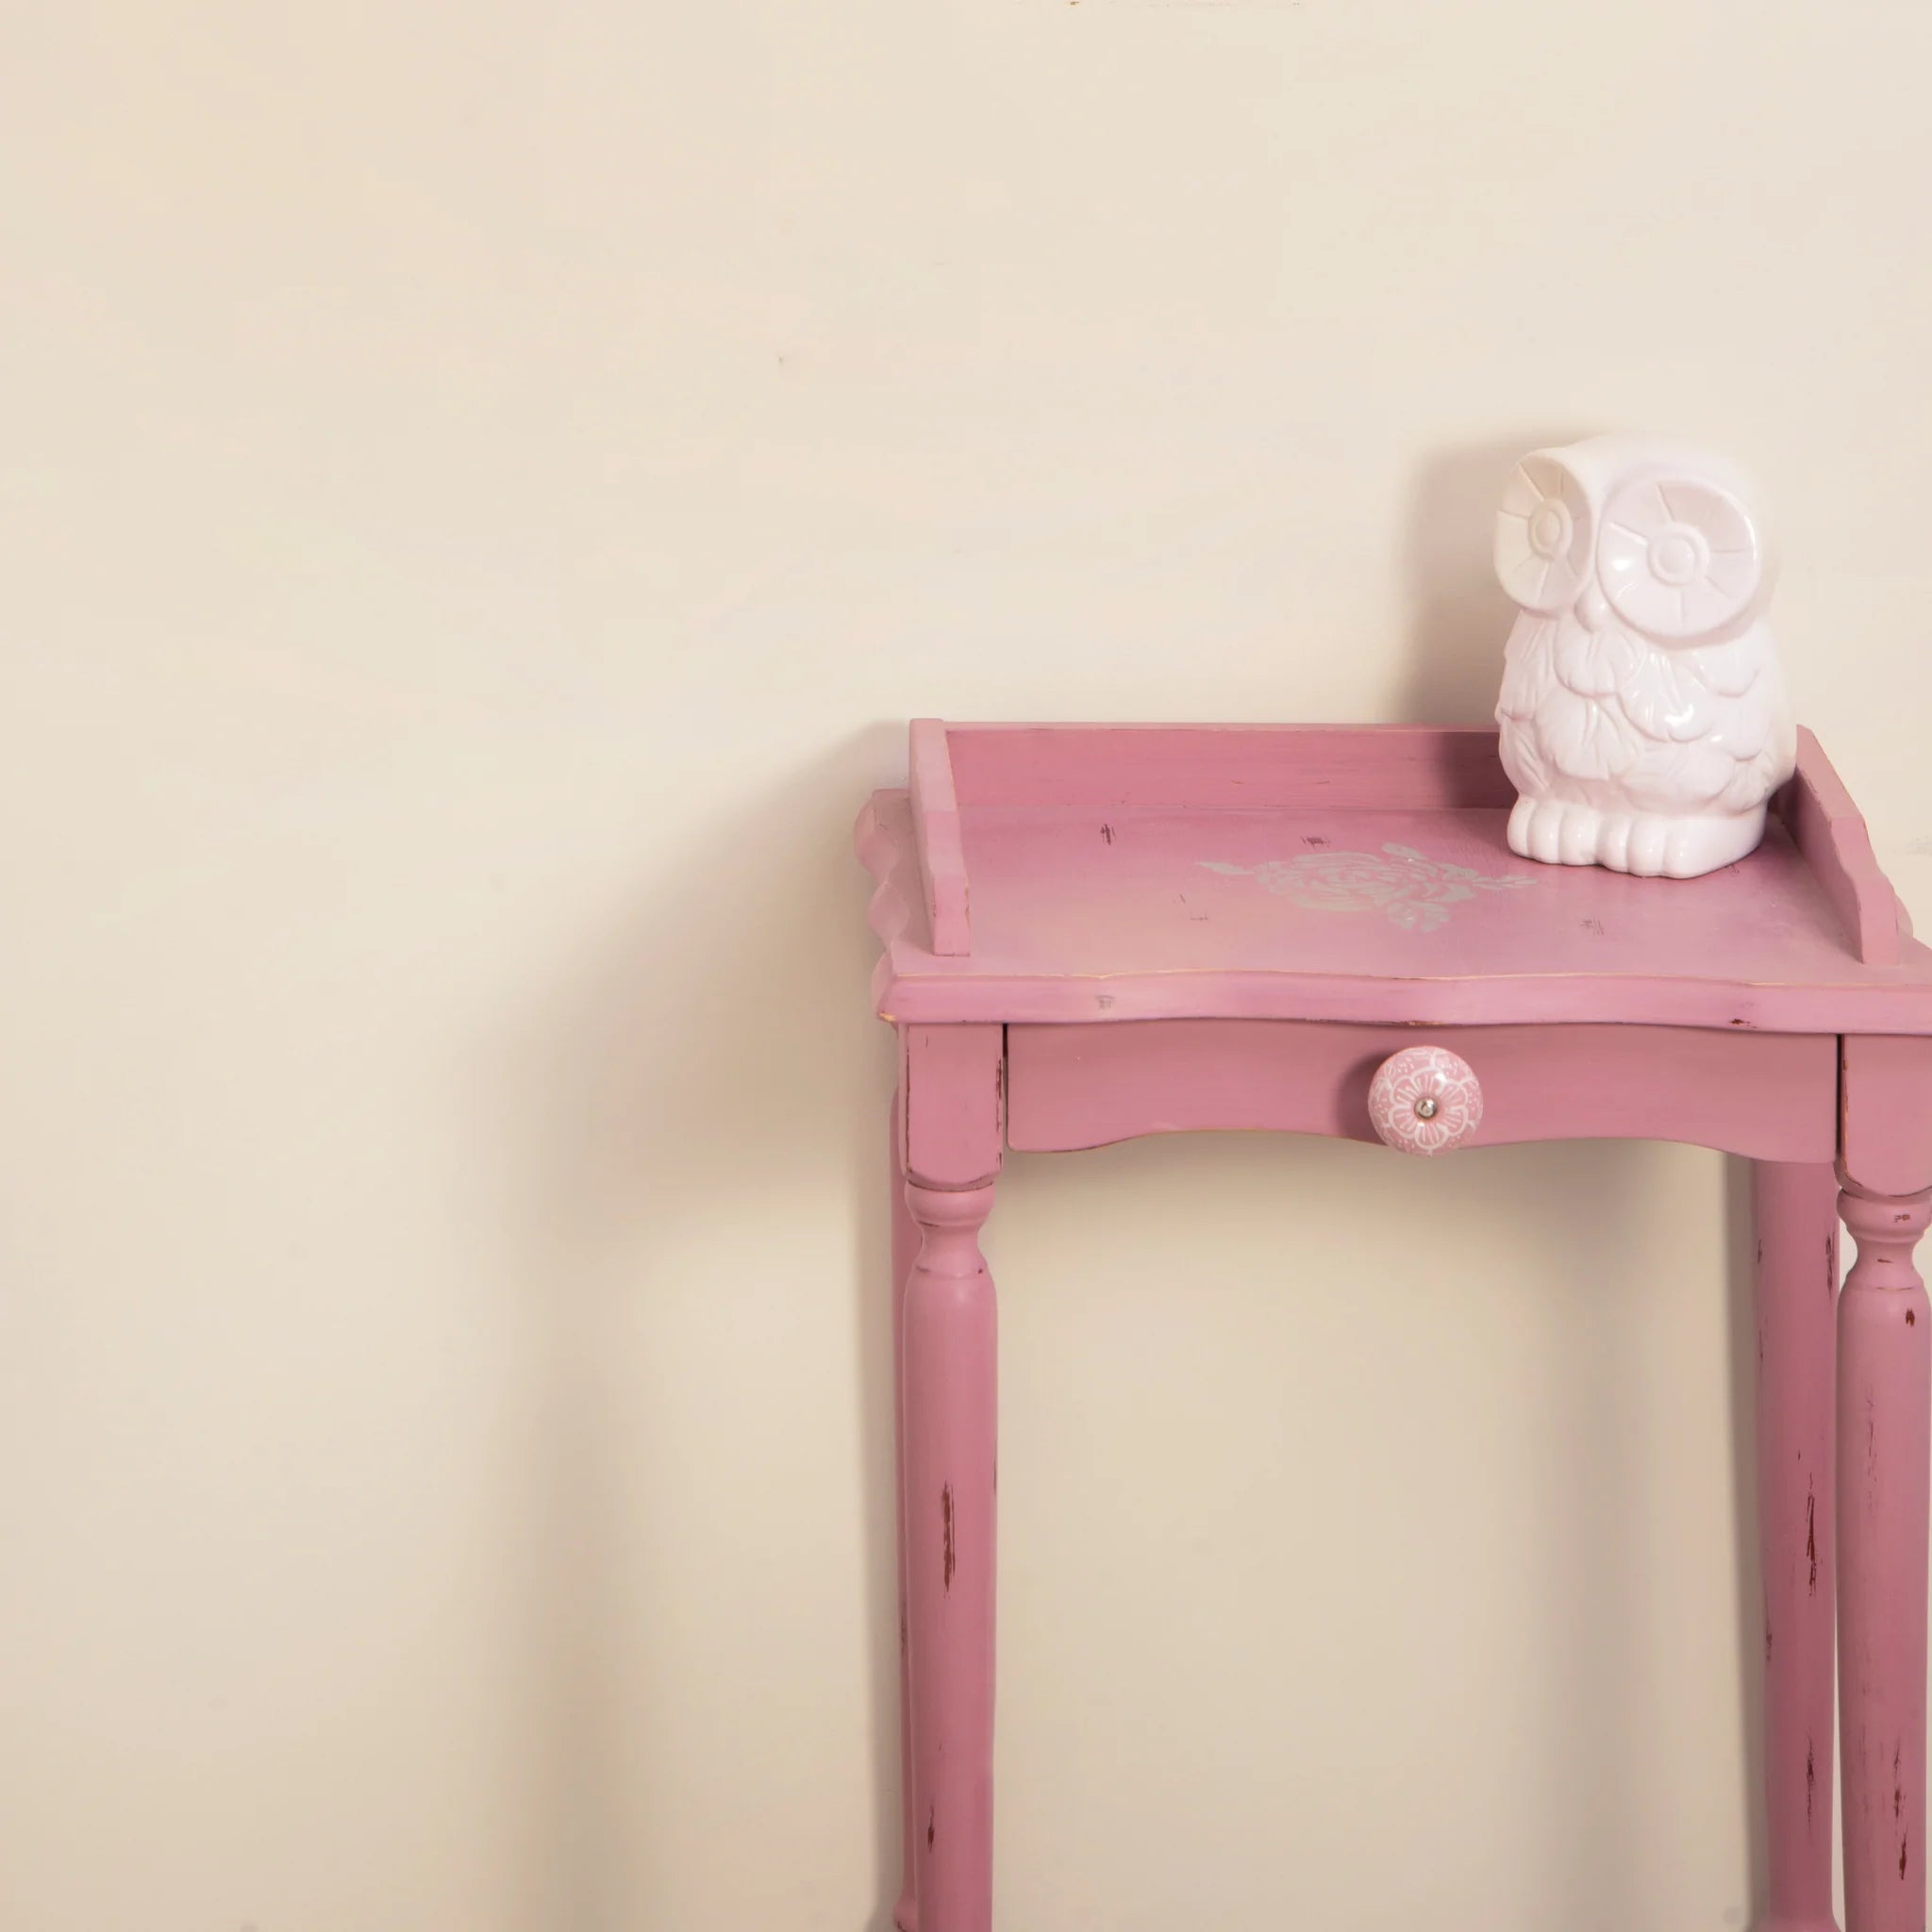 Frenchic Paint | Parchment Paint Sample by Weirs of Baggot St